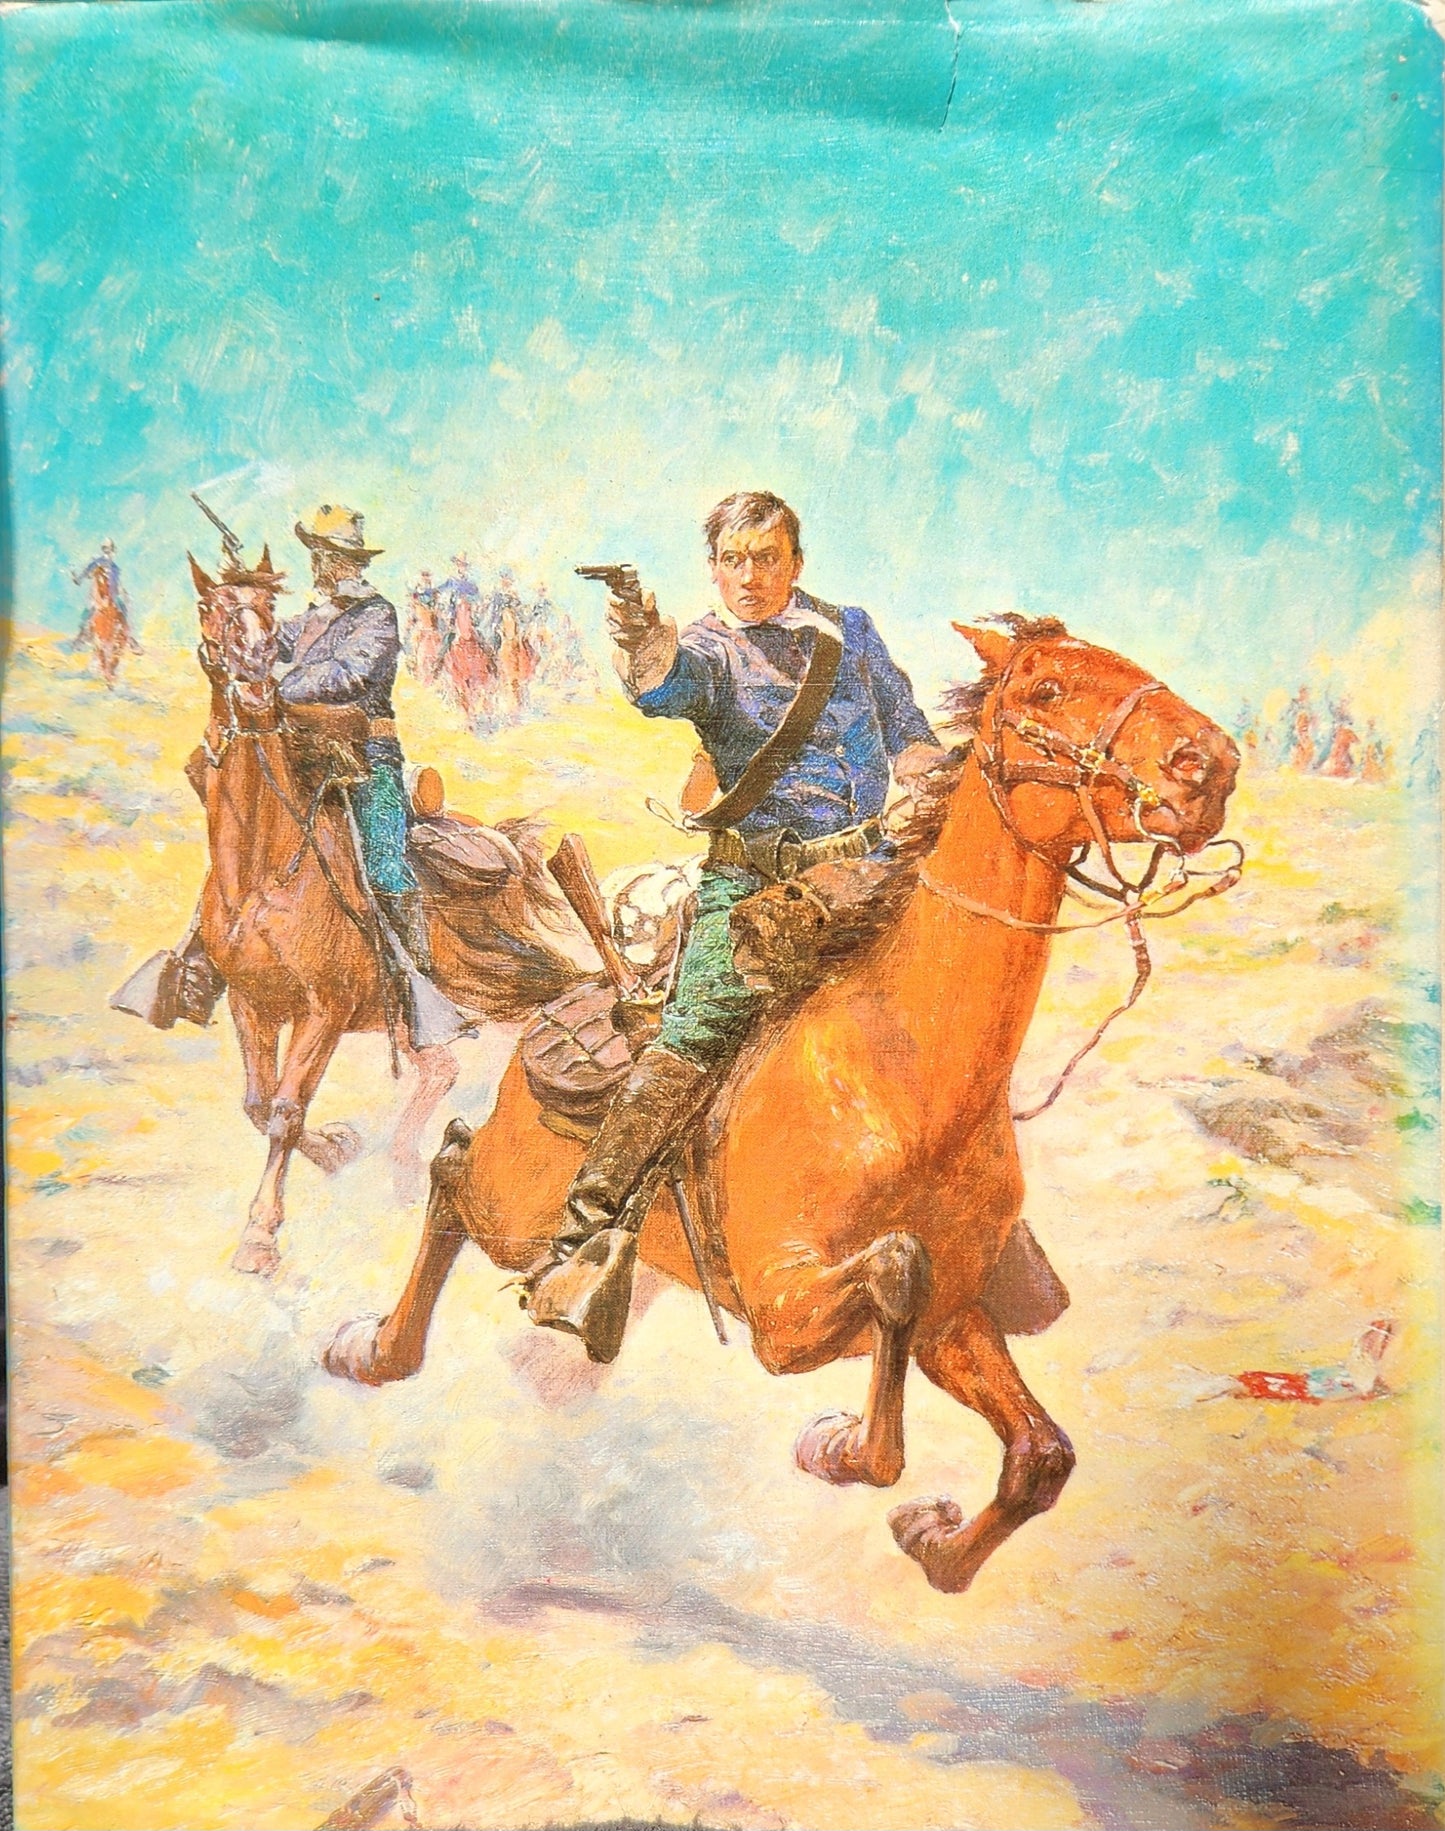 The United States Cavalry